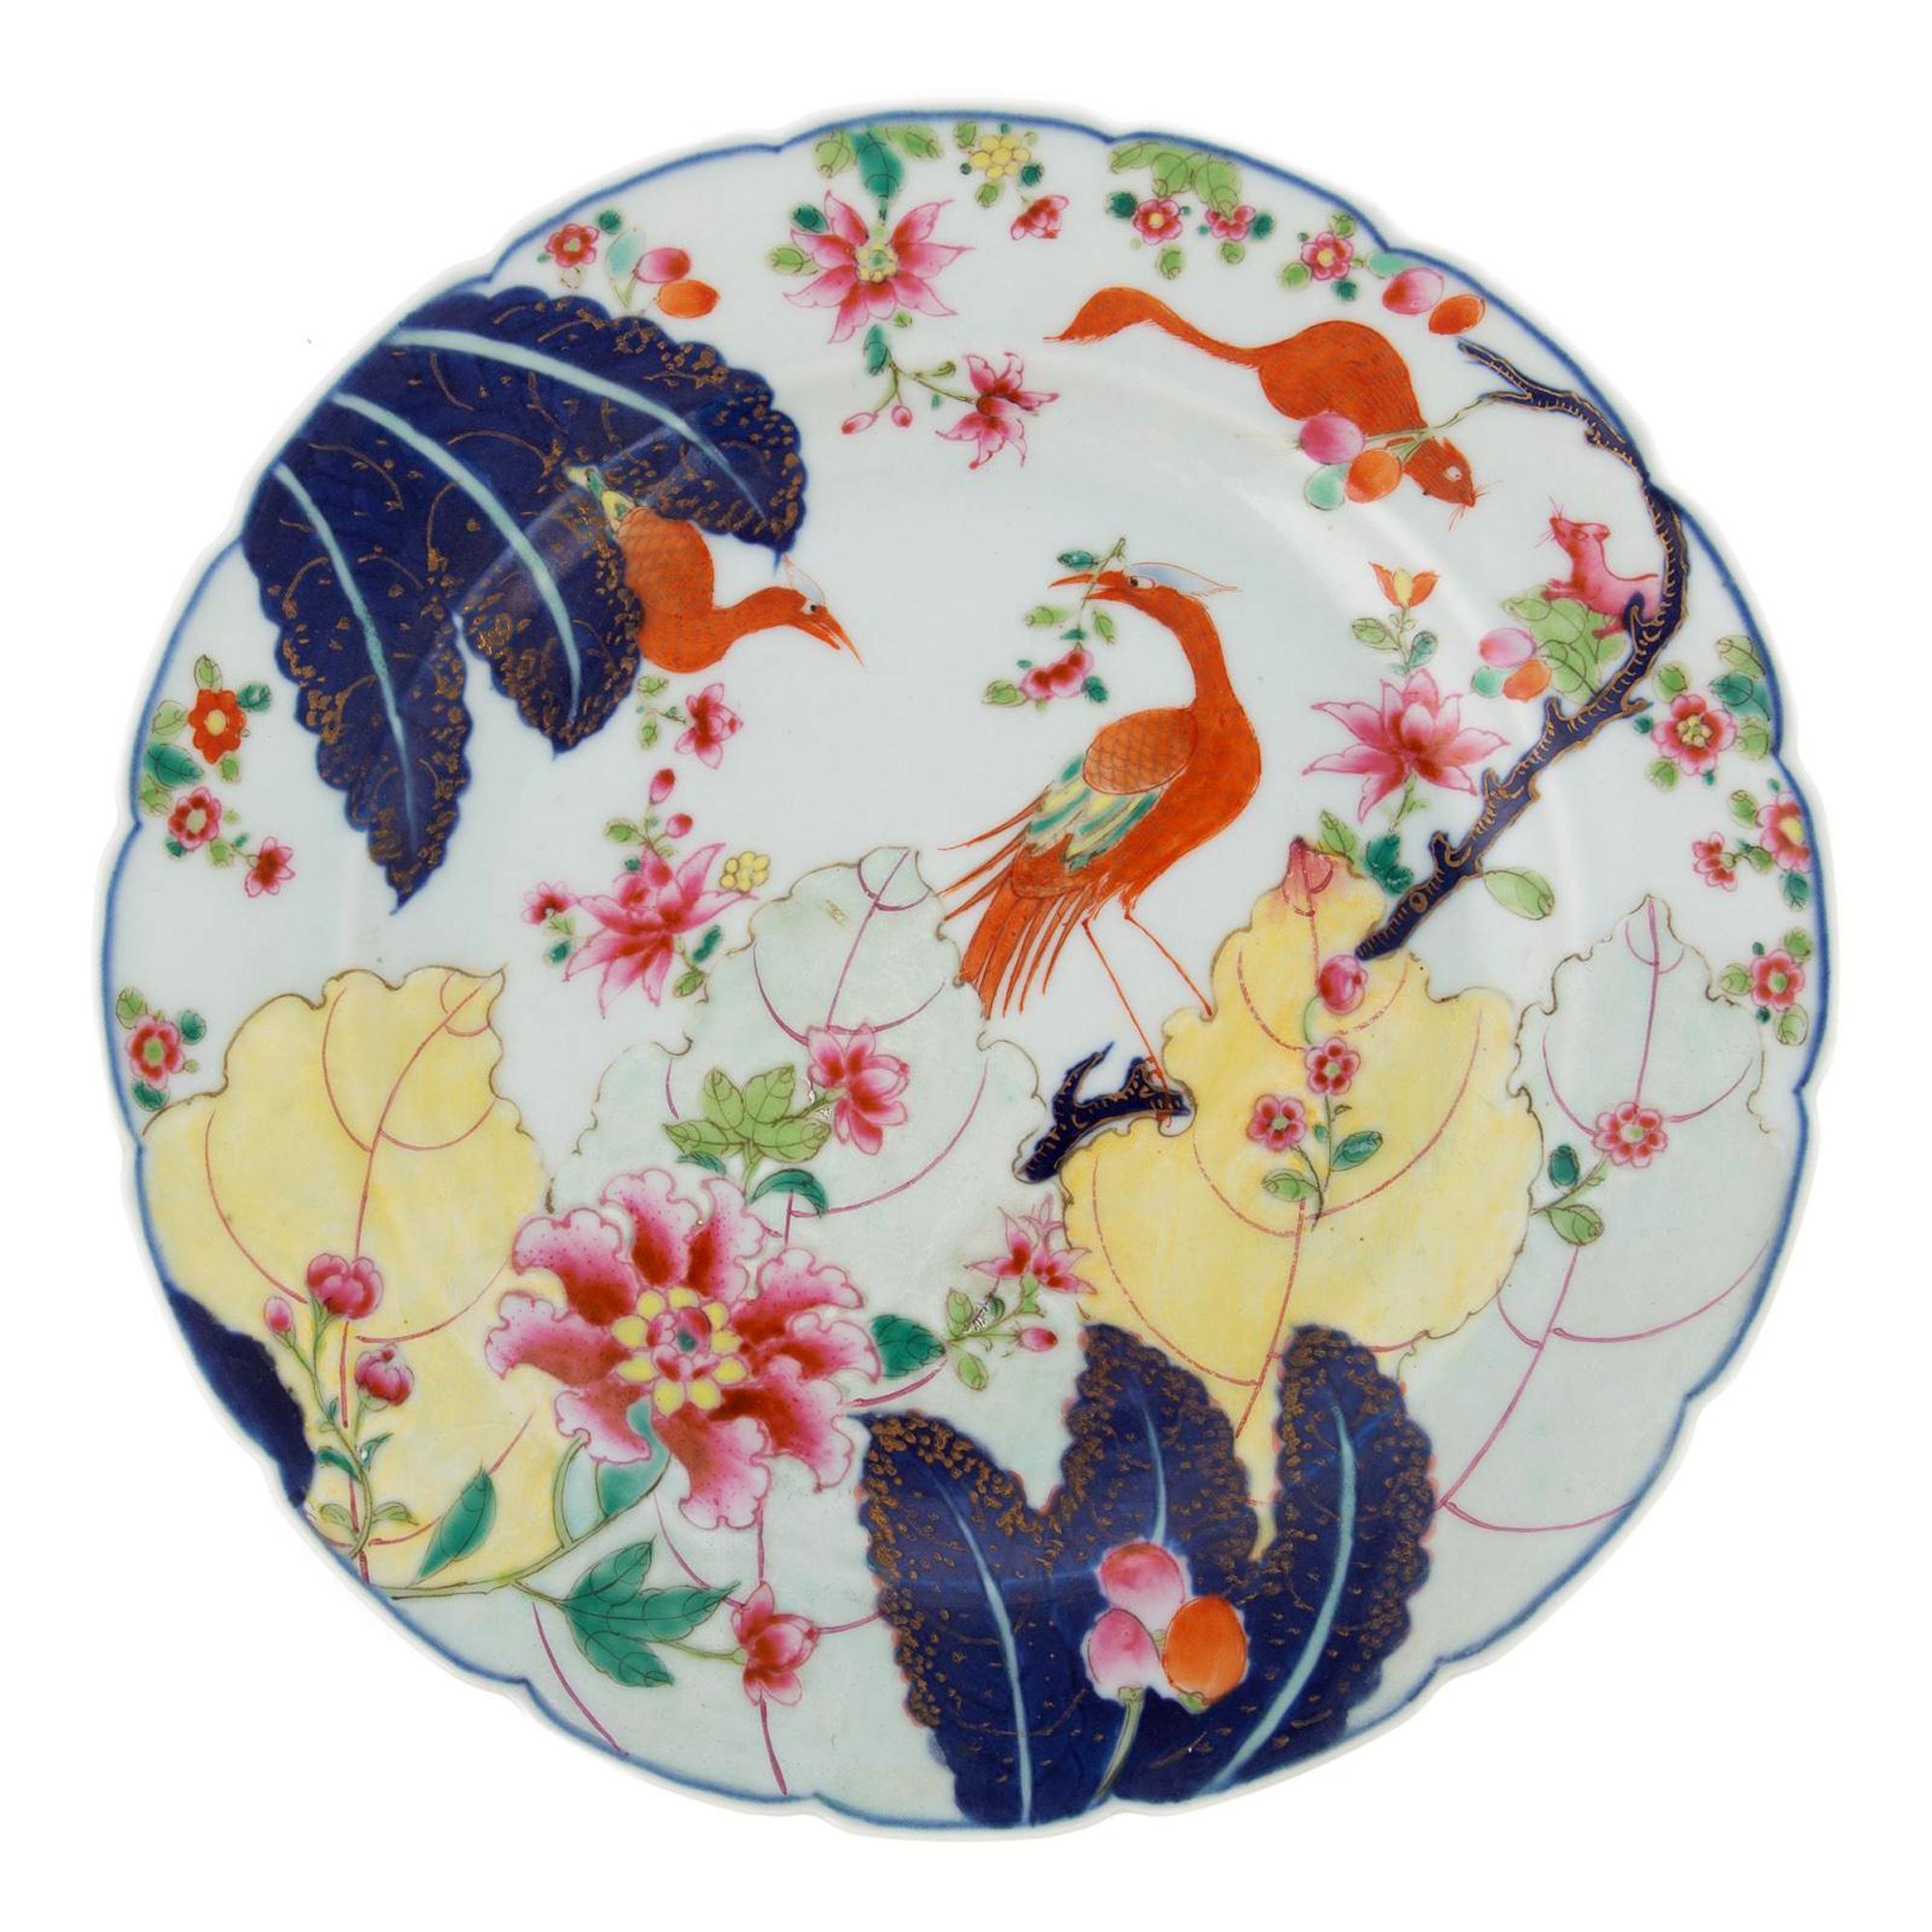 Chinese export Tobacco leaf plates,
Exotic Pheasants and Squirrel Pattern,
Qianlong Period,
Circa 1760-70

The exotic pheasants and squirrel pattern Chinese Export Tobacco Leaf plates are brightly painted in underglaze-blue and enameled in